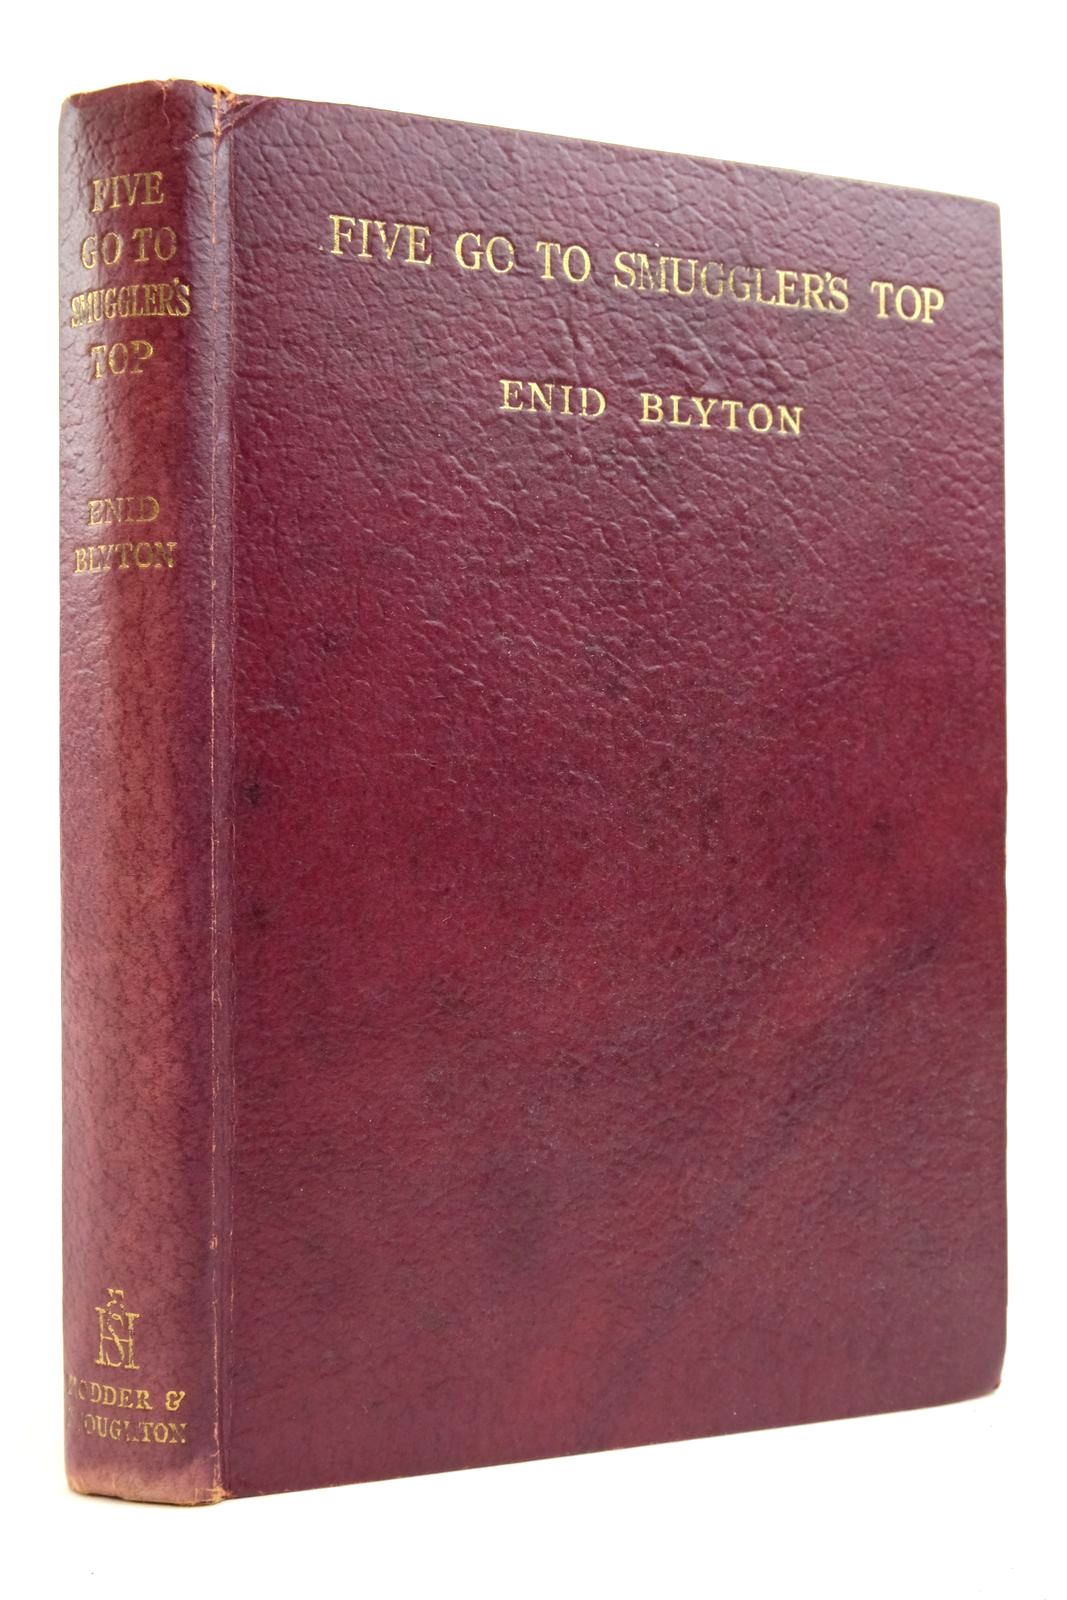 Photo of FIVE GO TO SMUGGLER'S TOP written by Blyton, Enid illustrated by Soper, Eileen published by Hodder &amp; Stoughton (STOCK CODE: 2135616)  for sale by Stella & Rose's Books